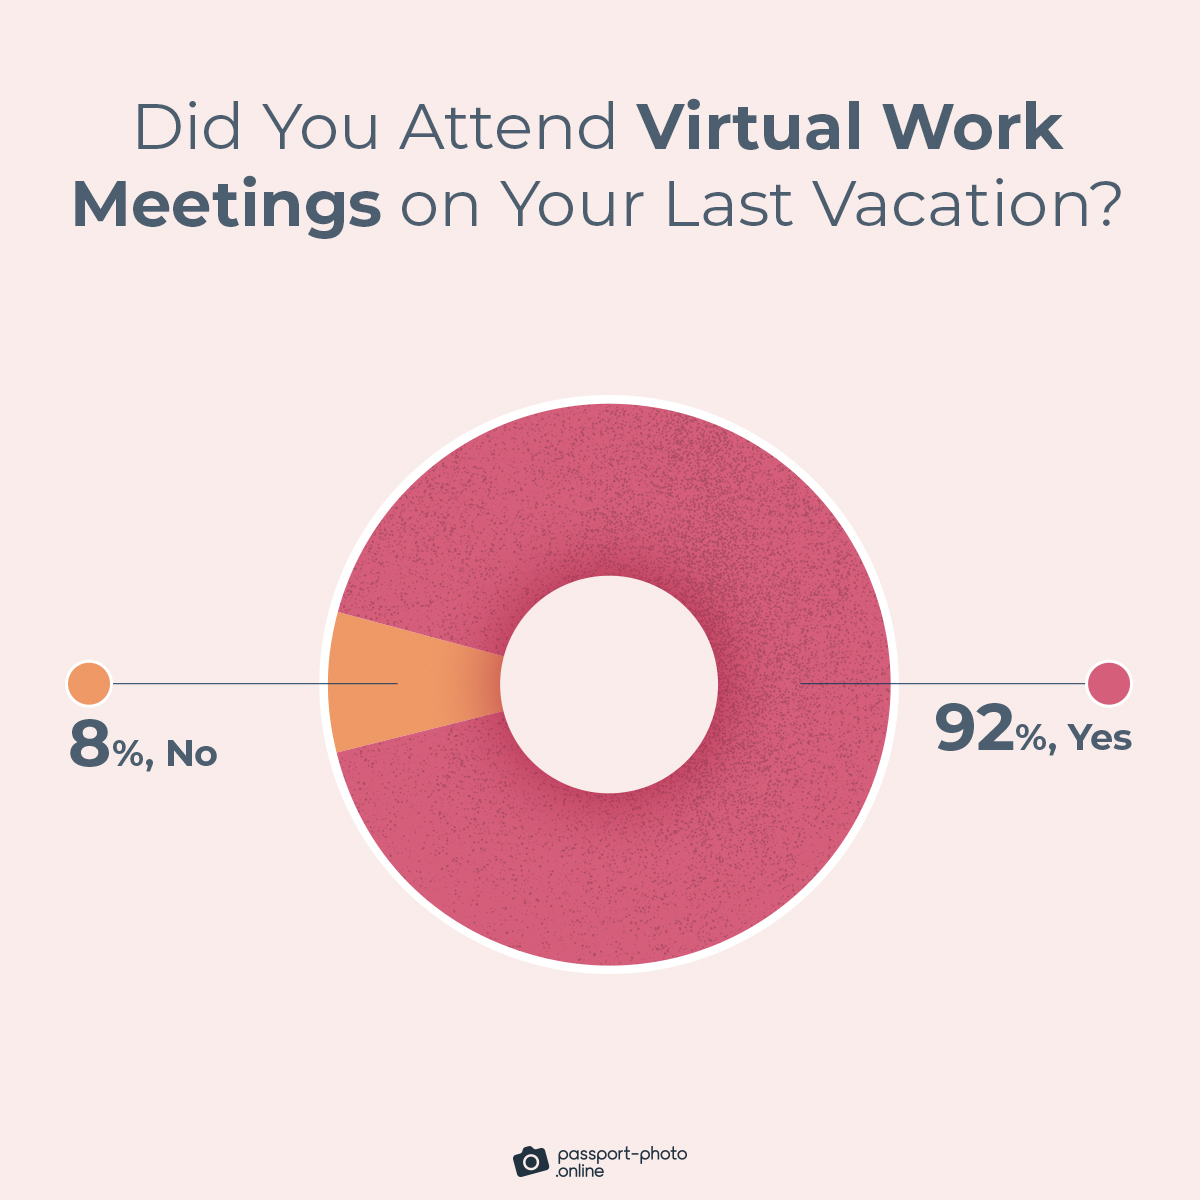 92% of US workers report attending at least one virtual meeting during their most recent vacation